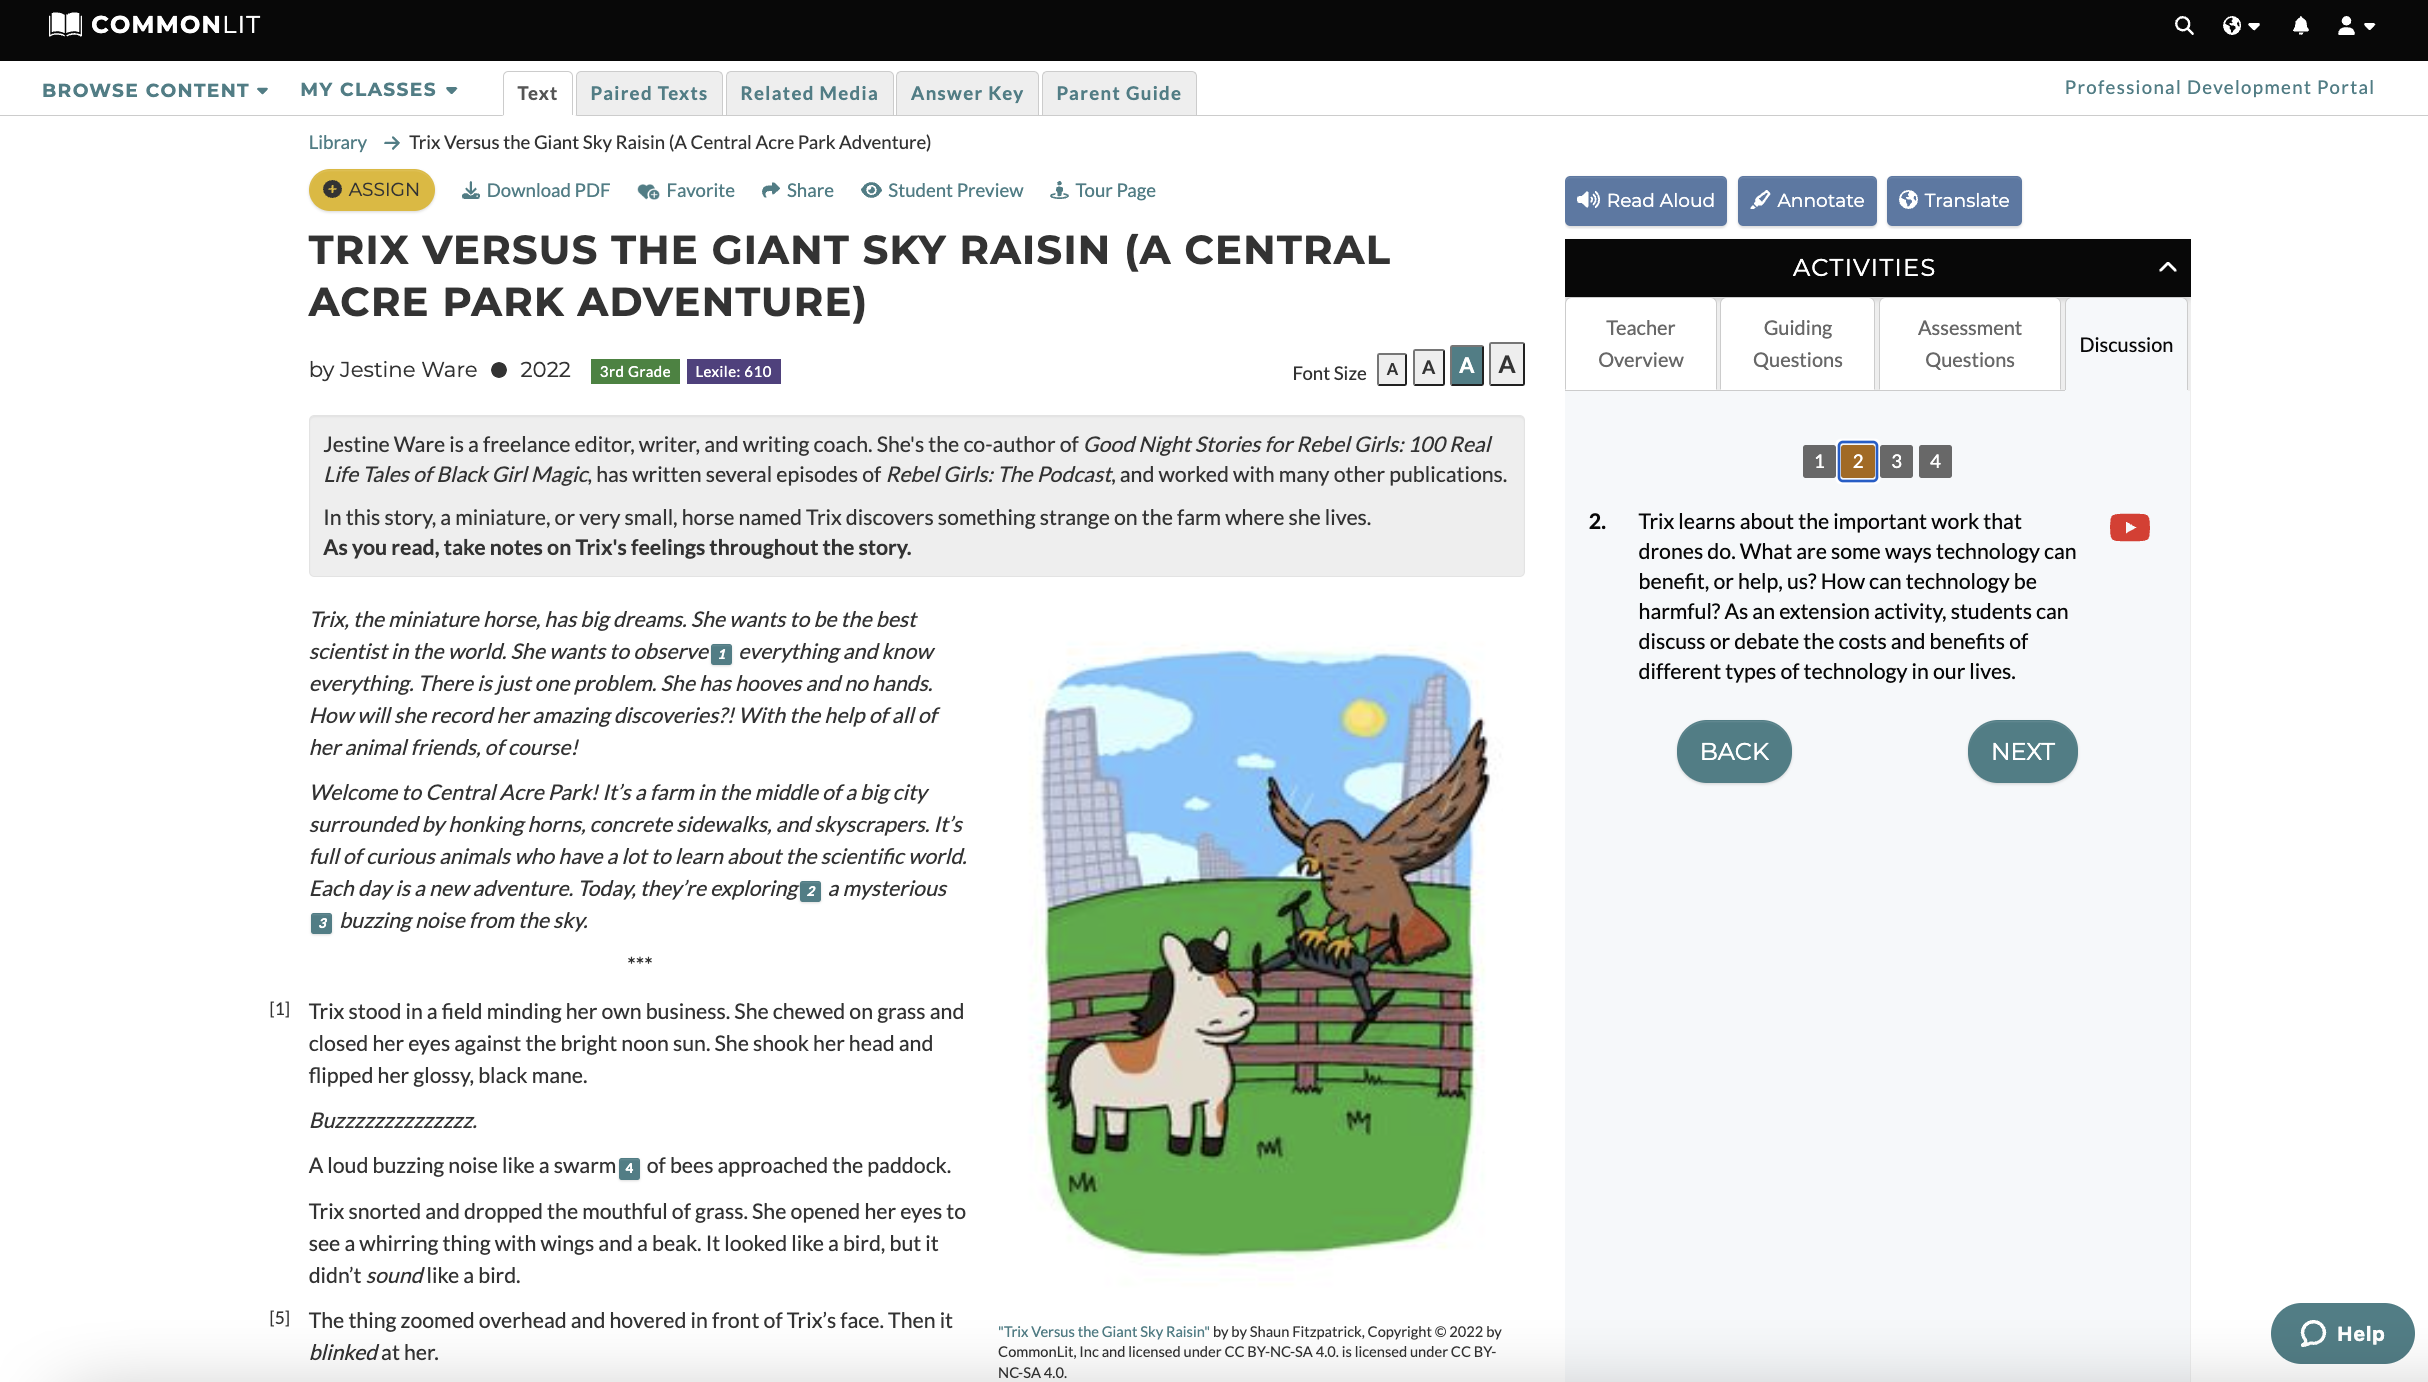 Screenshot of "Trix Versus the Giant Sky Raisin" text with Discussion Question 2 selected on CommonLit.